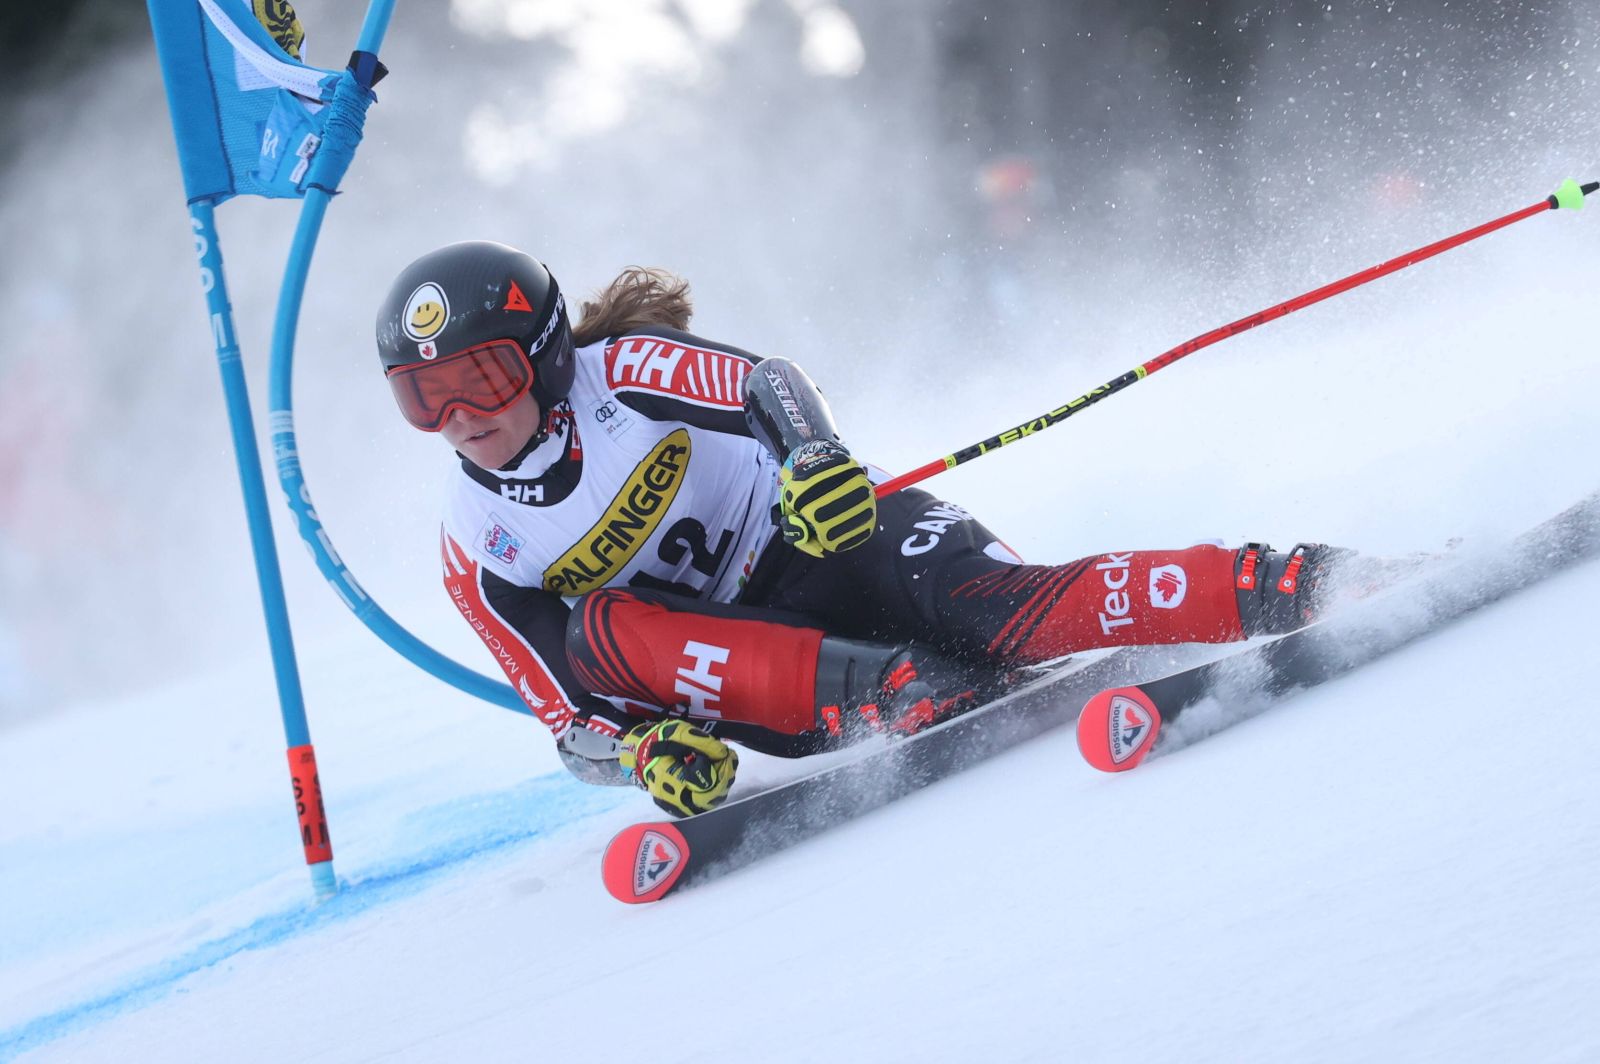 epa10393717 Valerie Grenier of Canada in action during the first round of the Women's Slalom at the FIS Alpine Skiing World Cup in Kranjska Gora, Slovenia, 07 January 2023.  EPA/Grzegorz Momot POLAND OUT